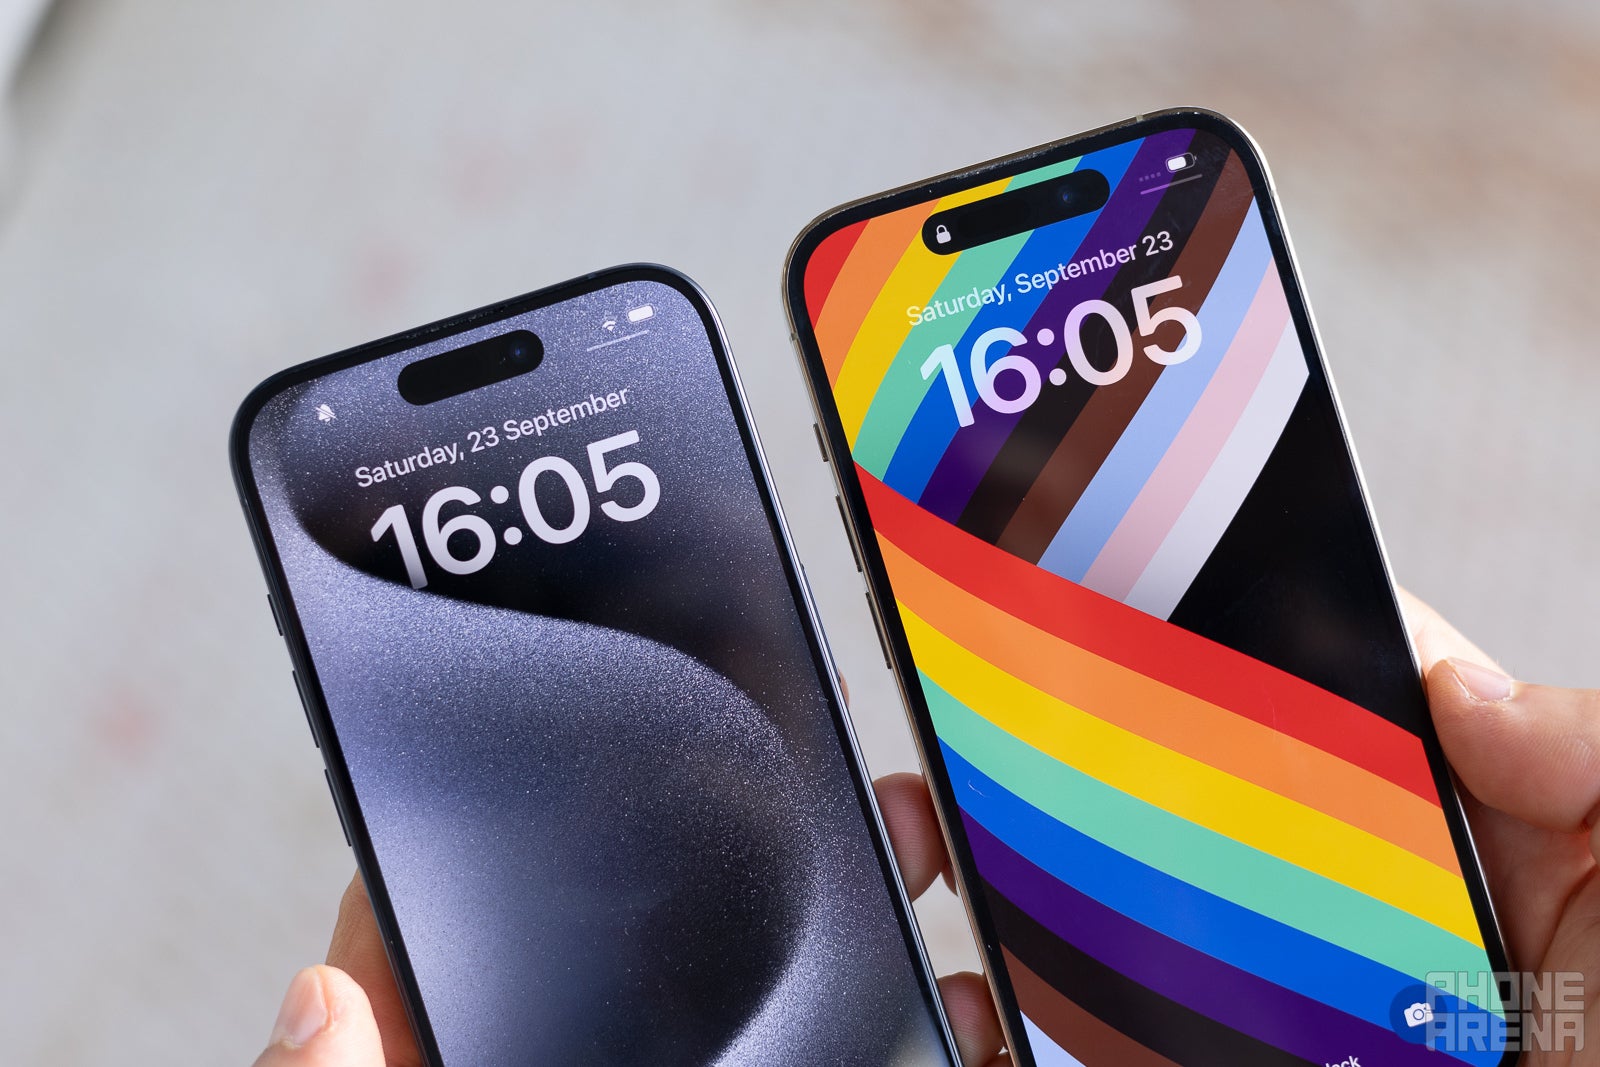 (Image Credit - PhoneArena) iPhone 15 Pro has thinner borders around the screen compared to 14 Pro on the right - iPhone 15 Pro Review: enter the era of USB-C